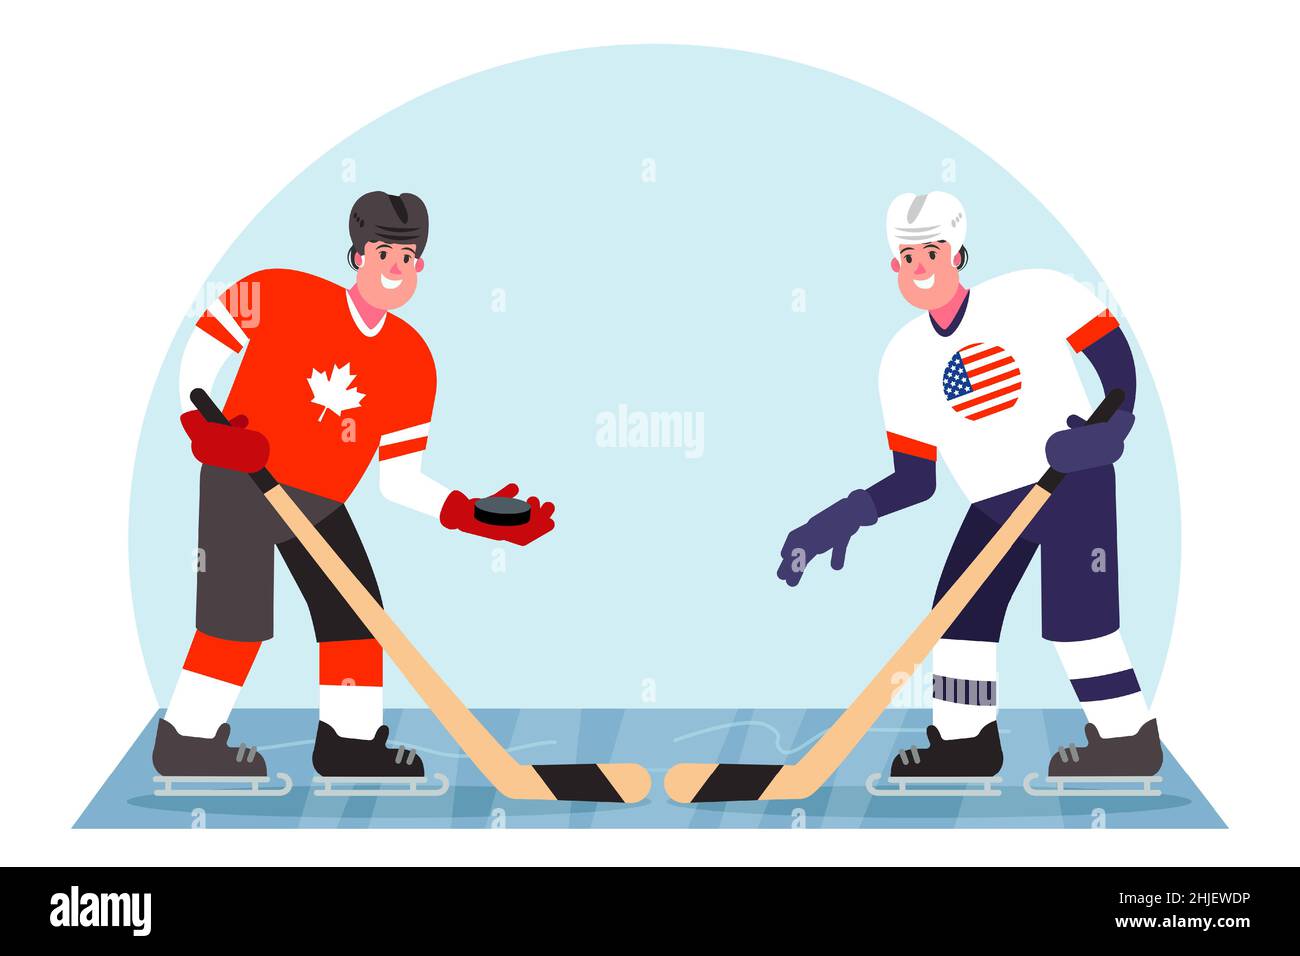 Ice hockey players. Competition between Canada and the USA. Vector illustration in a flat style. Stock Vector